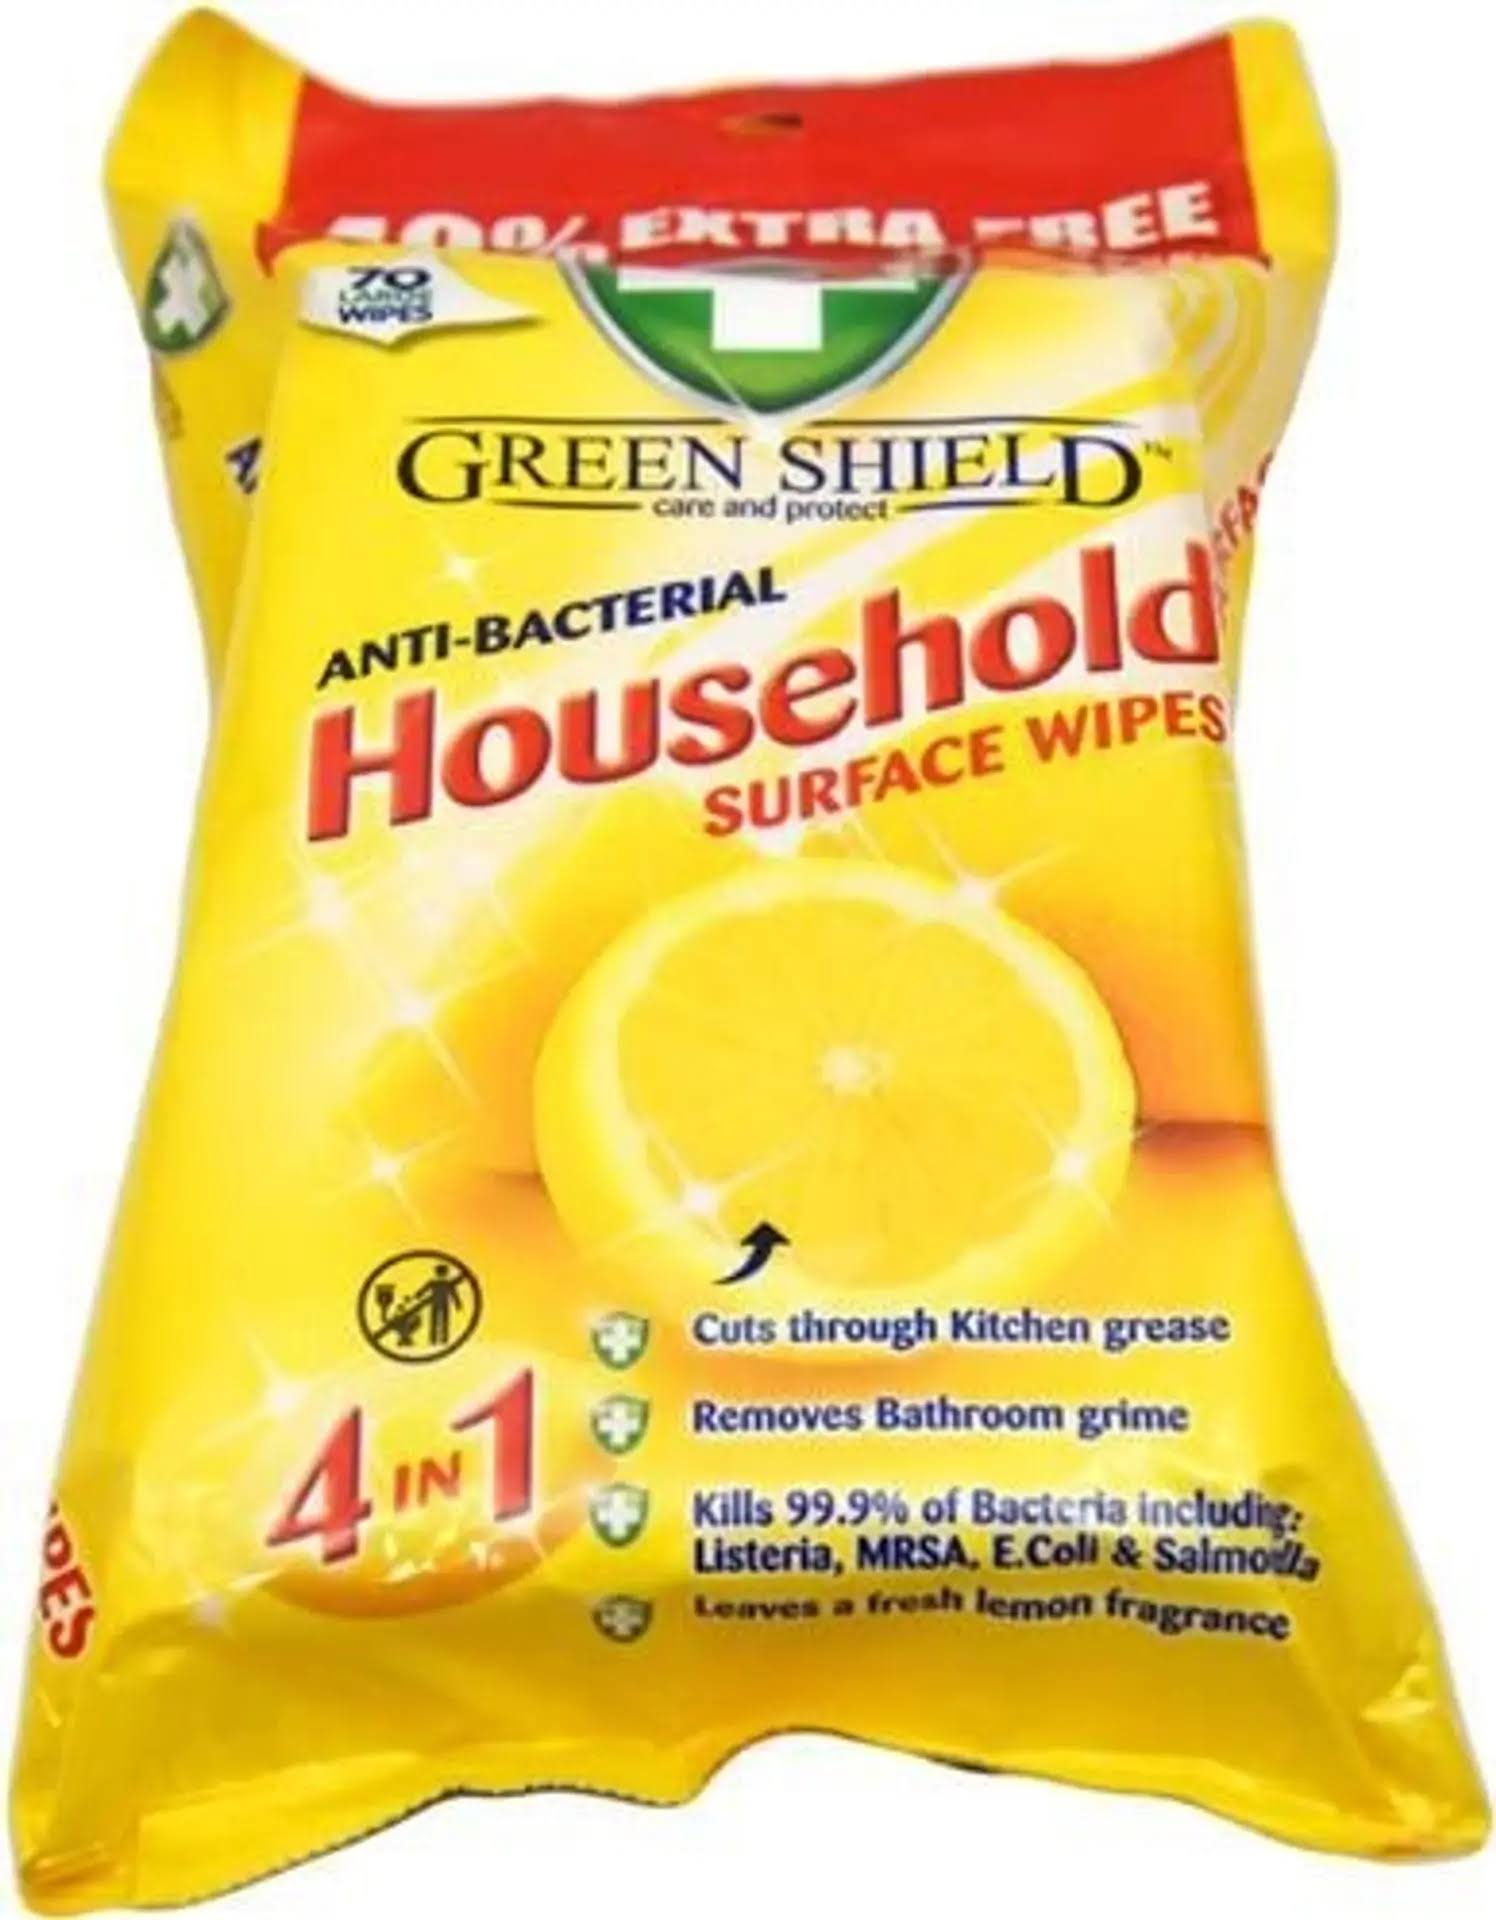 Green Shield 4 in 1 Anti-Bacterial Household Surface Wipes - 70pcs, XLarge